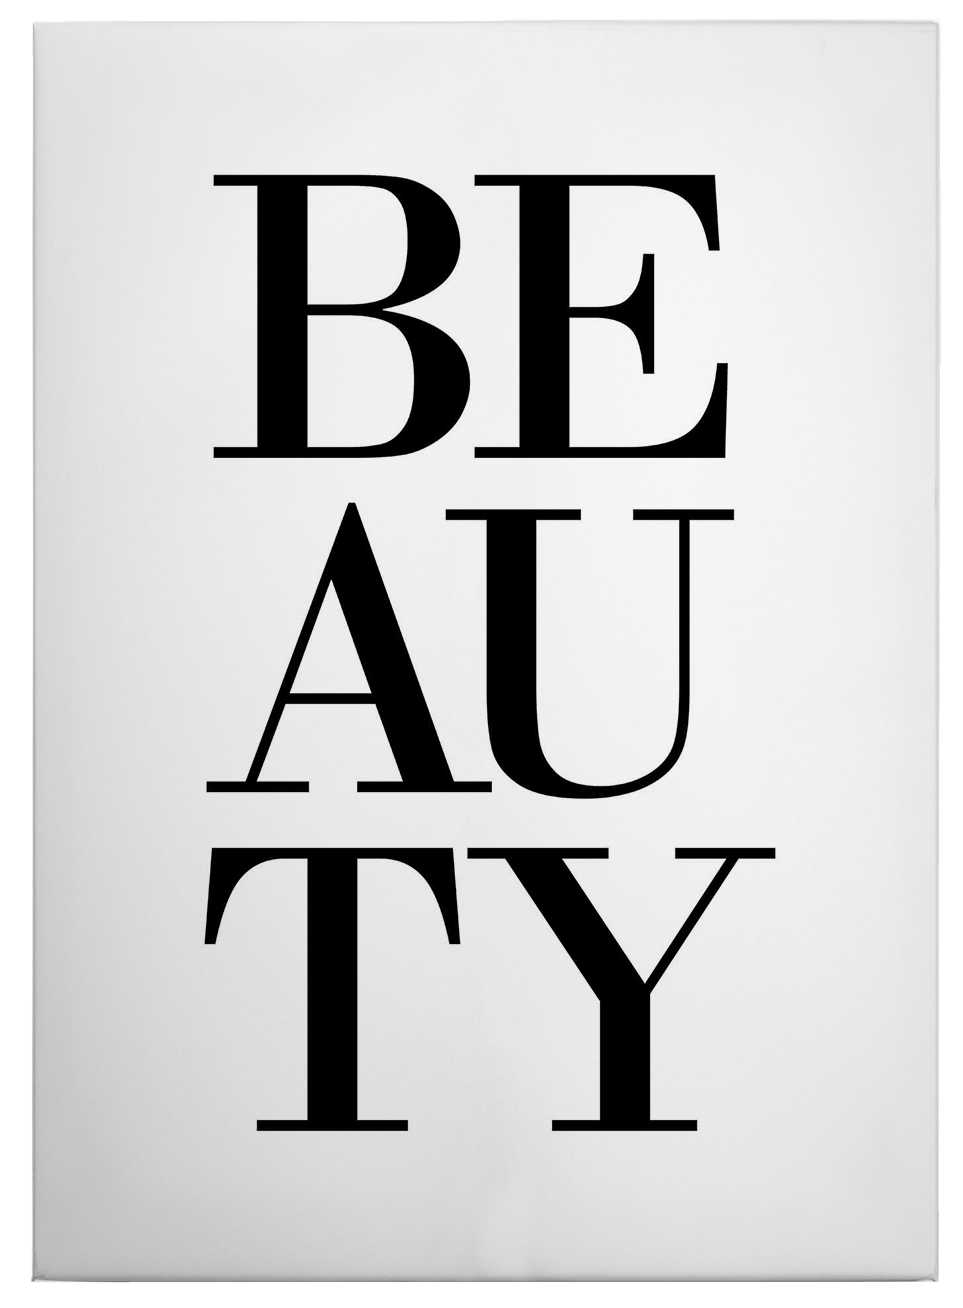             Canvas print saying beauty – black and white
        